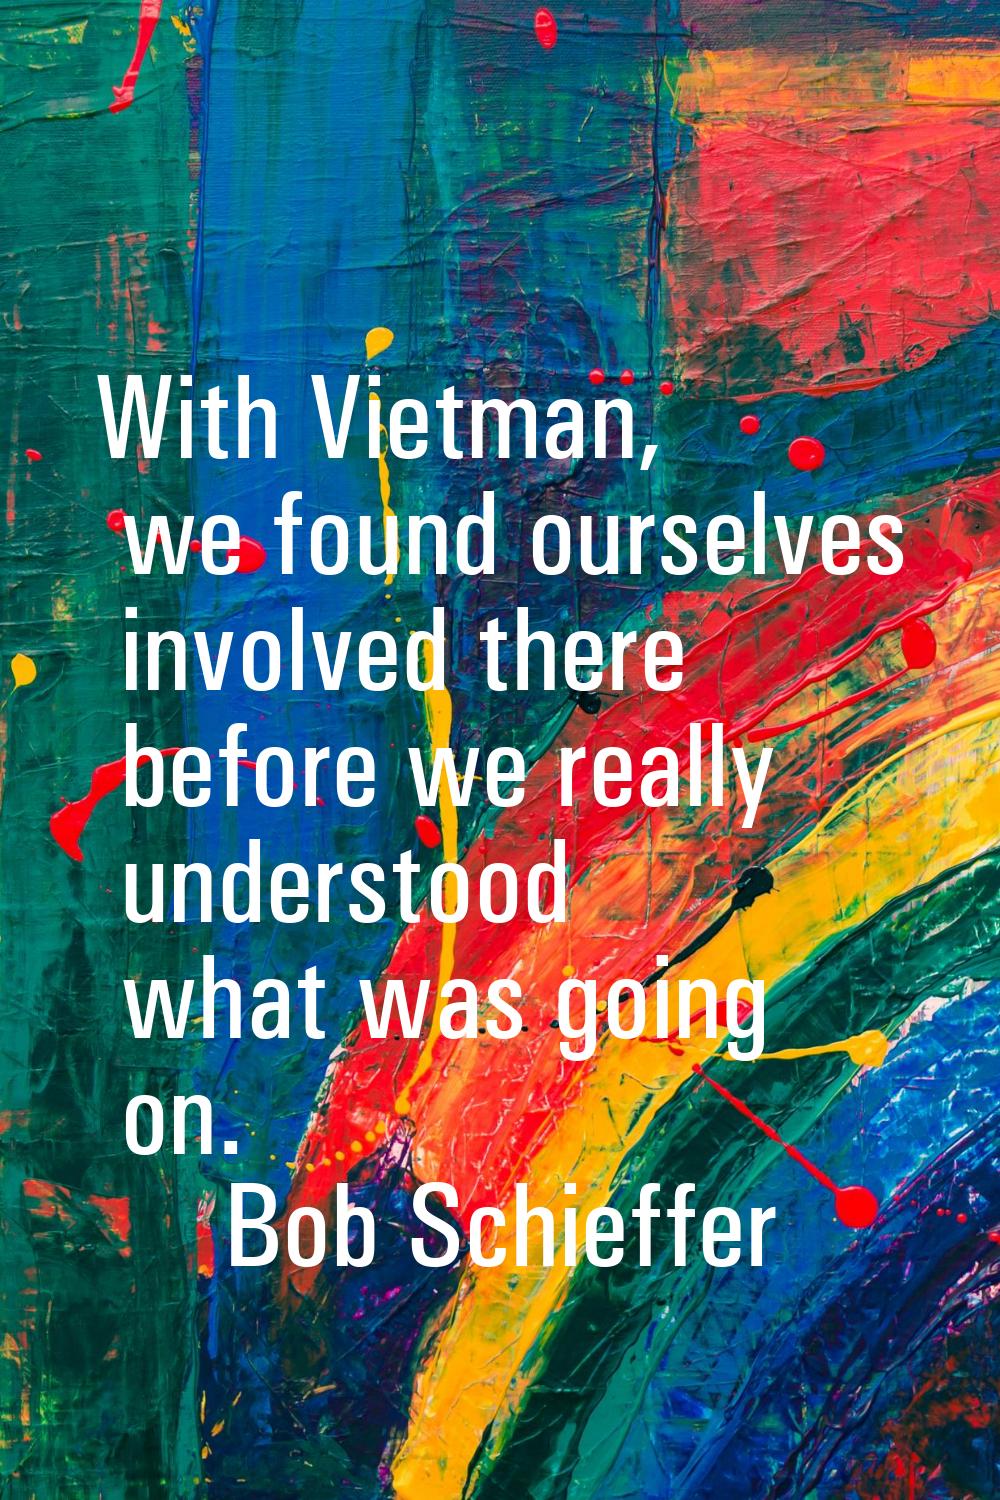 With Vietman, we found ourselves involved there before we really understood what was going on.